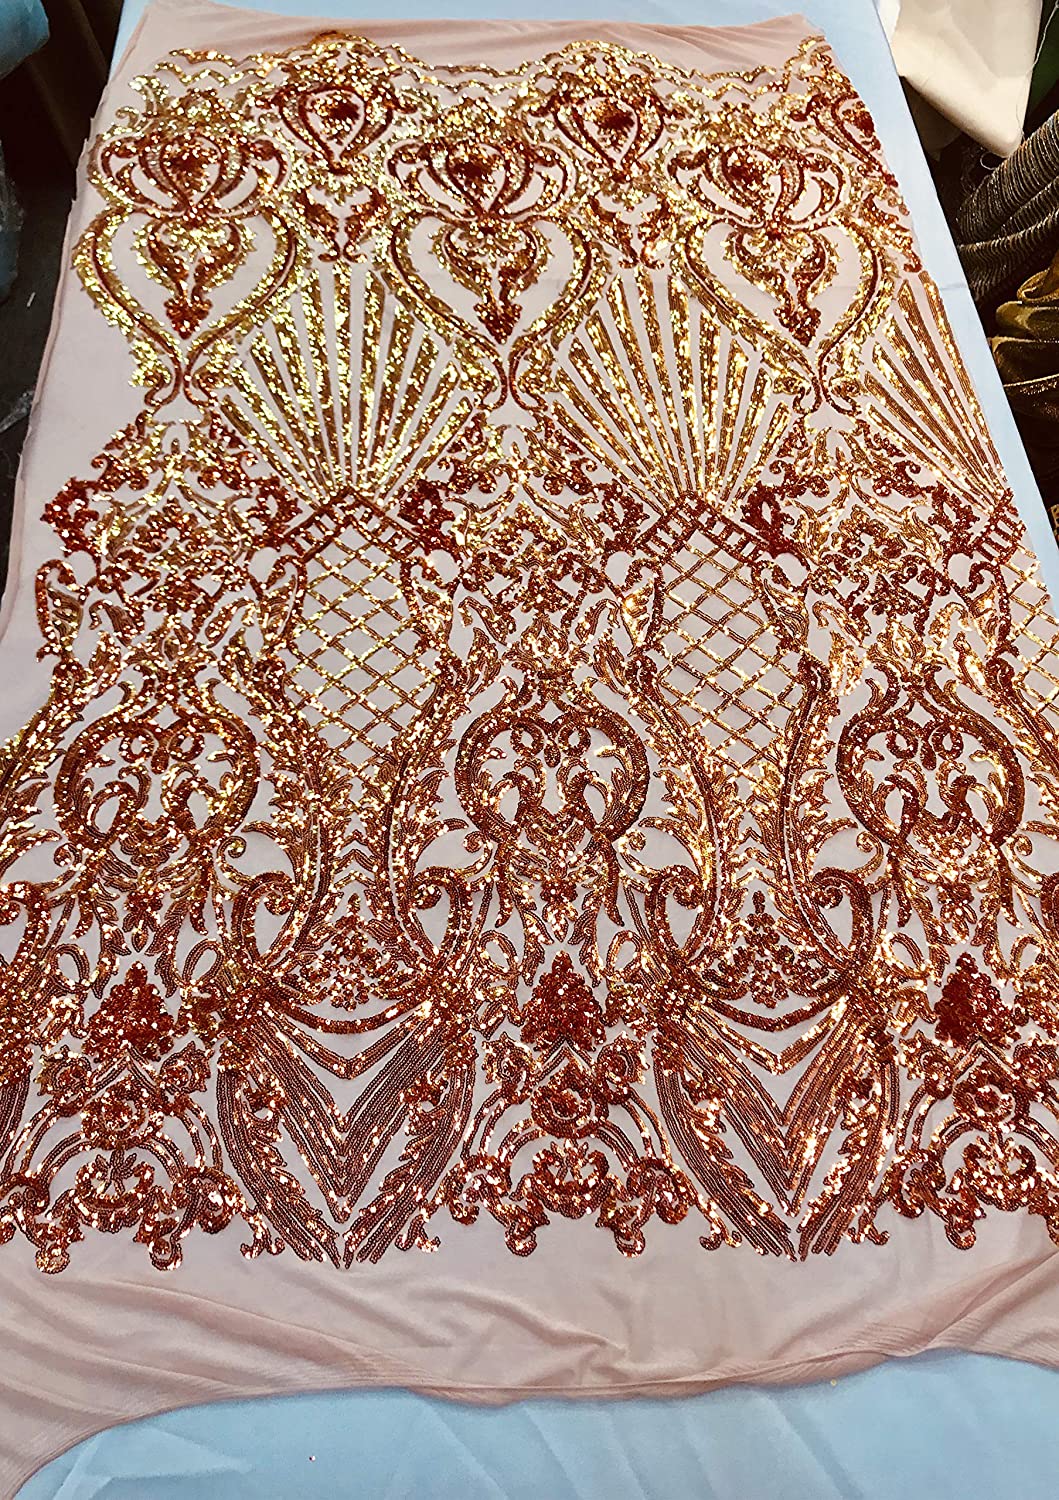 Damask Sequins Design on a 4 Way Stretch Mesh Fabric - for Night Gowns - Prom Dresses - (Orange Iridescent on Nude, 1 Yard)